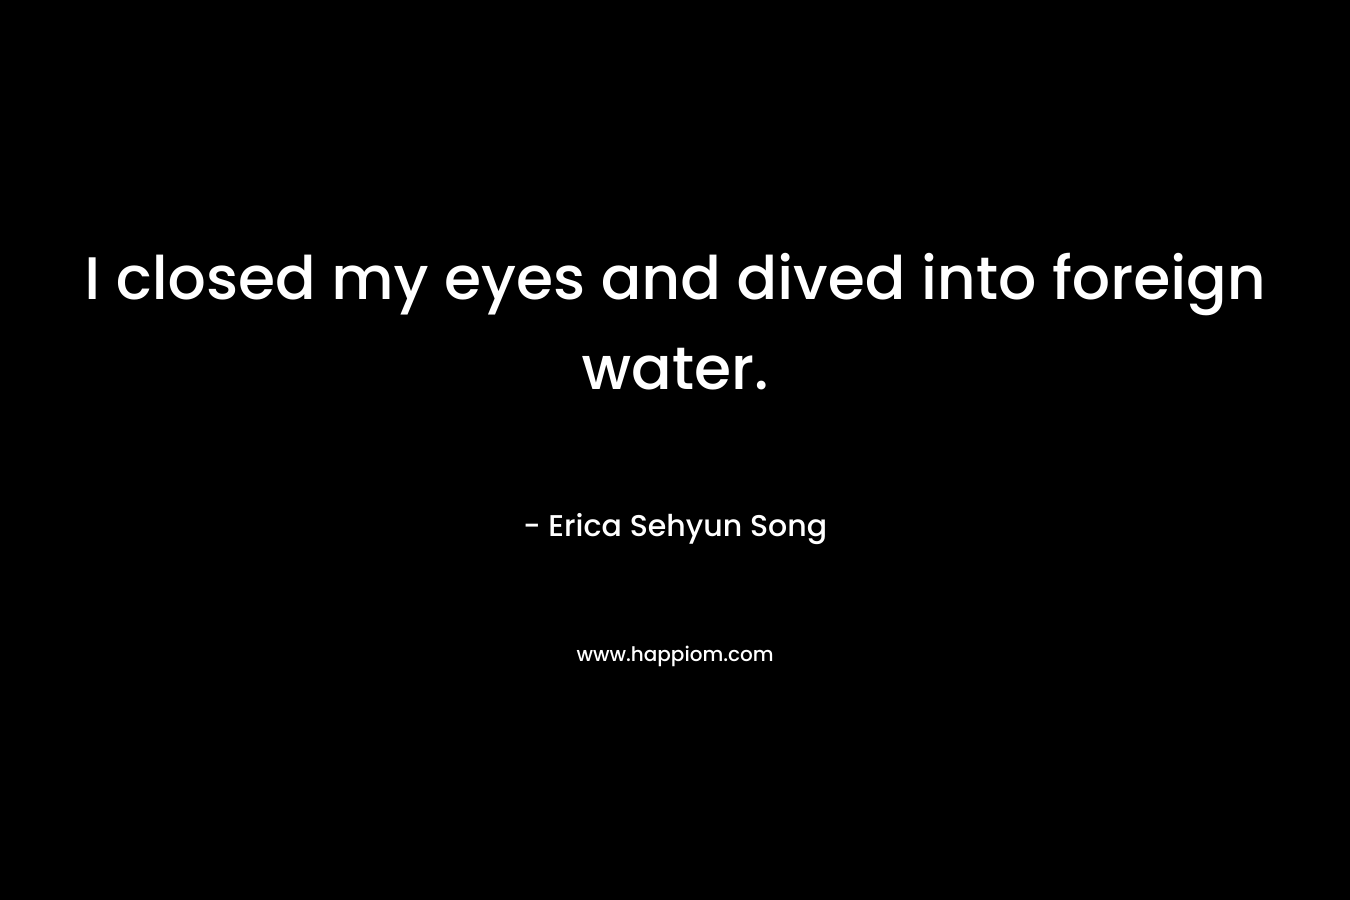 I closed my eyes and dived into foreign water. – Erica Sehyun Song